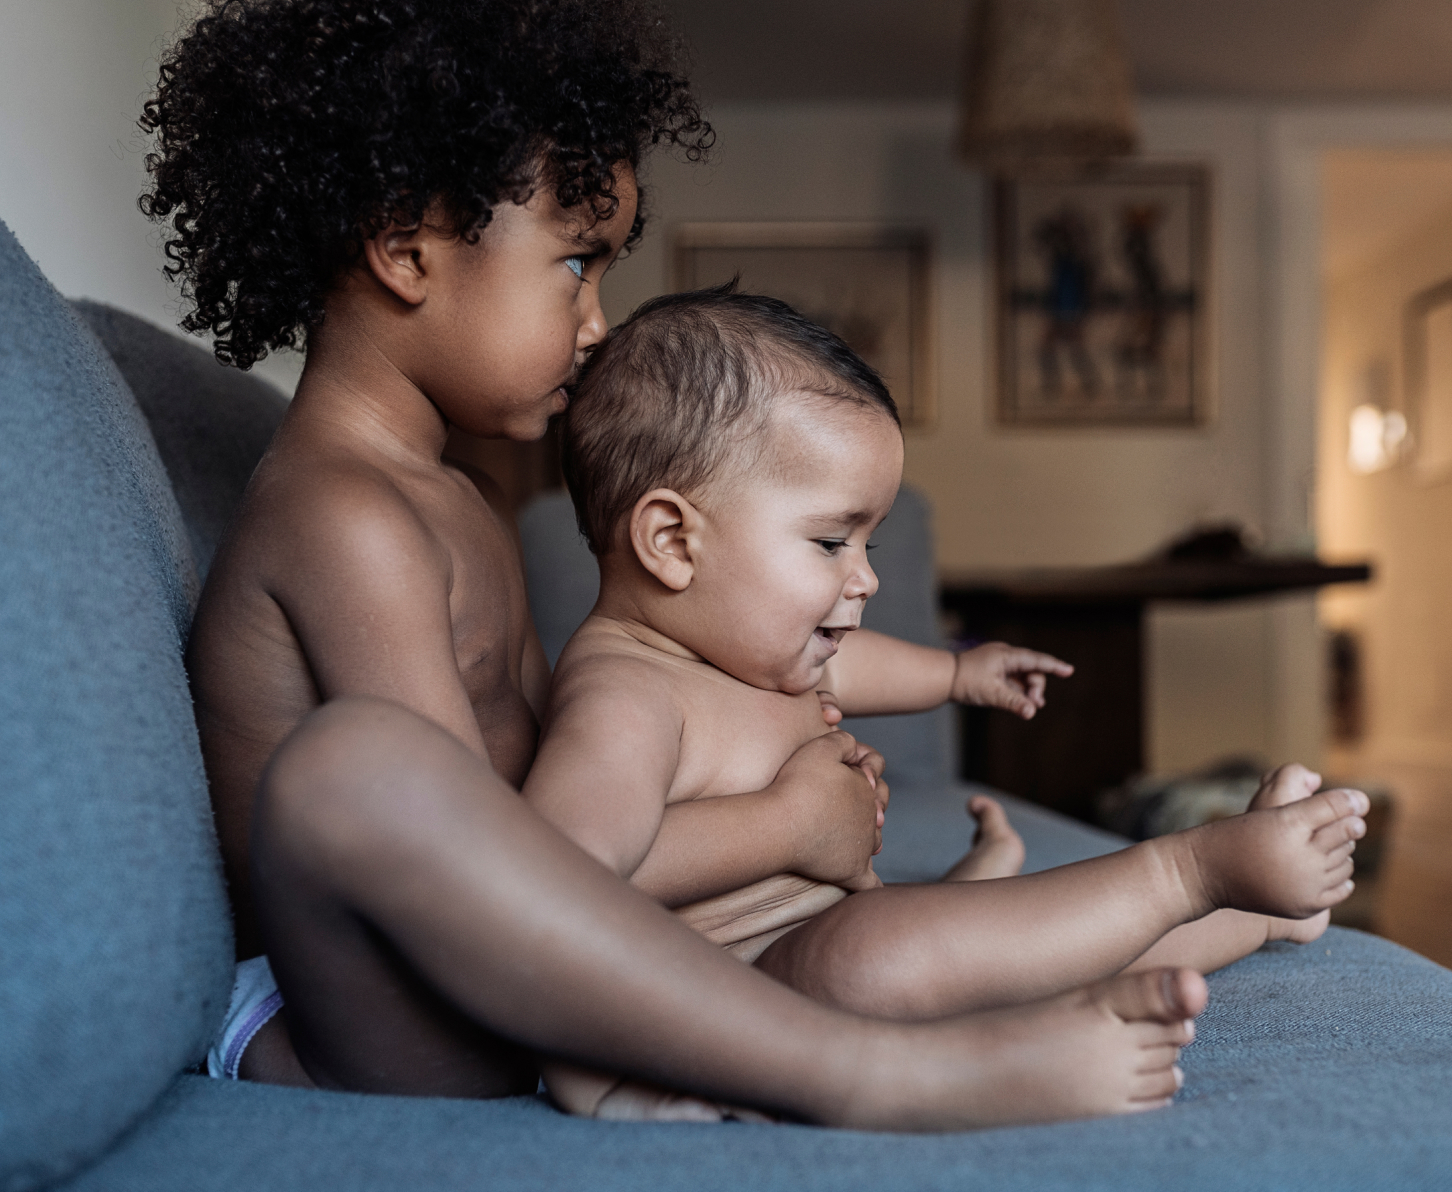 Two young siblings sitting side by side on a couch